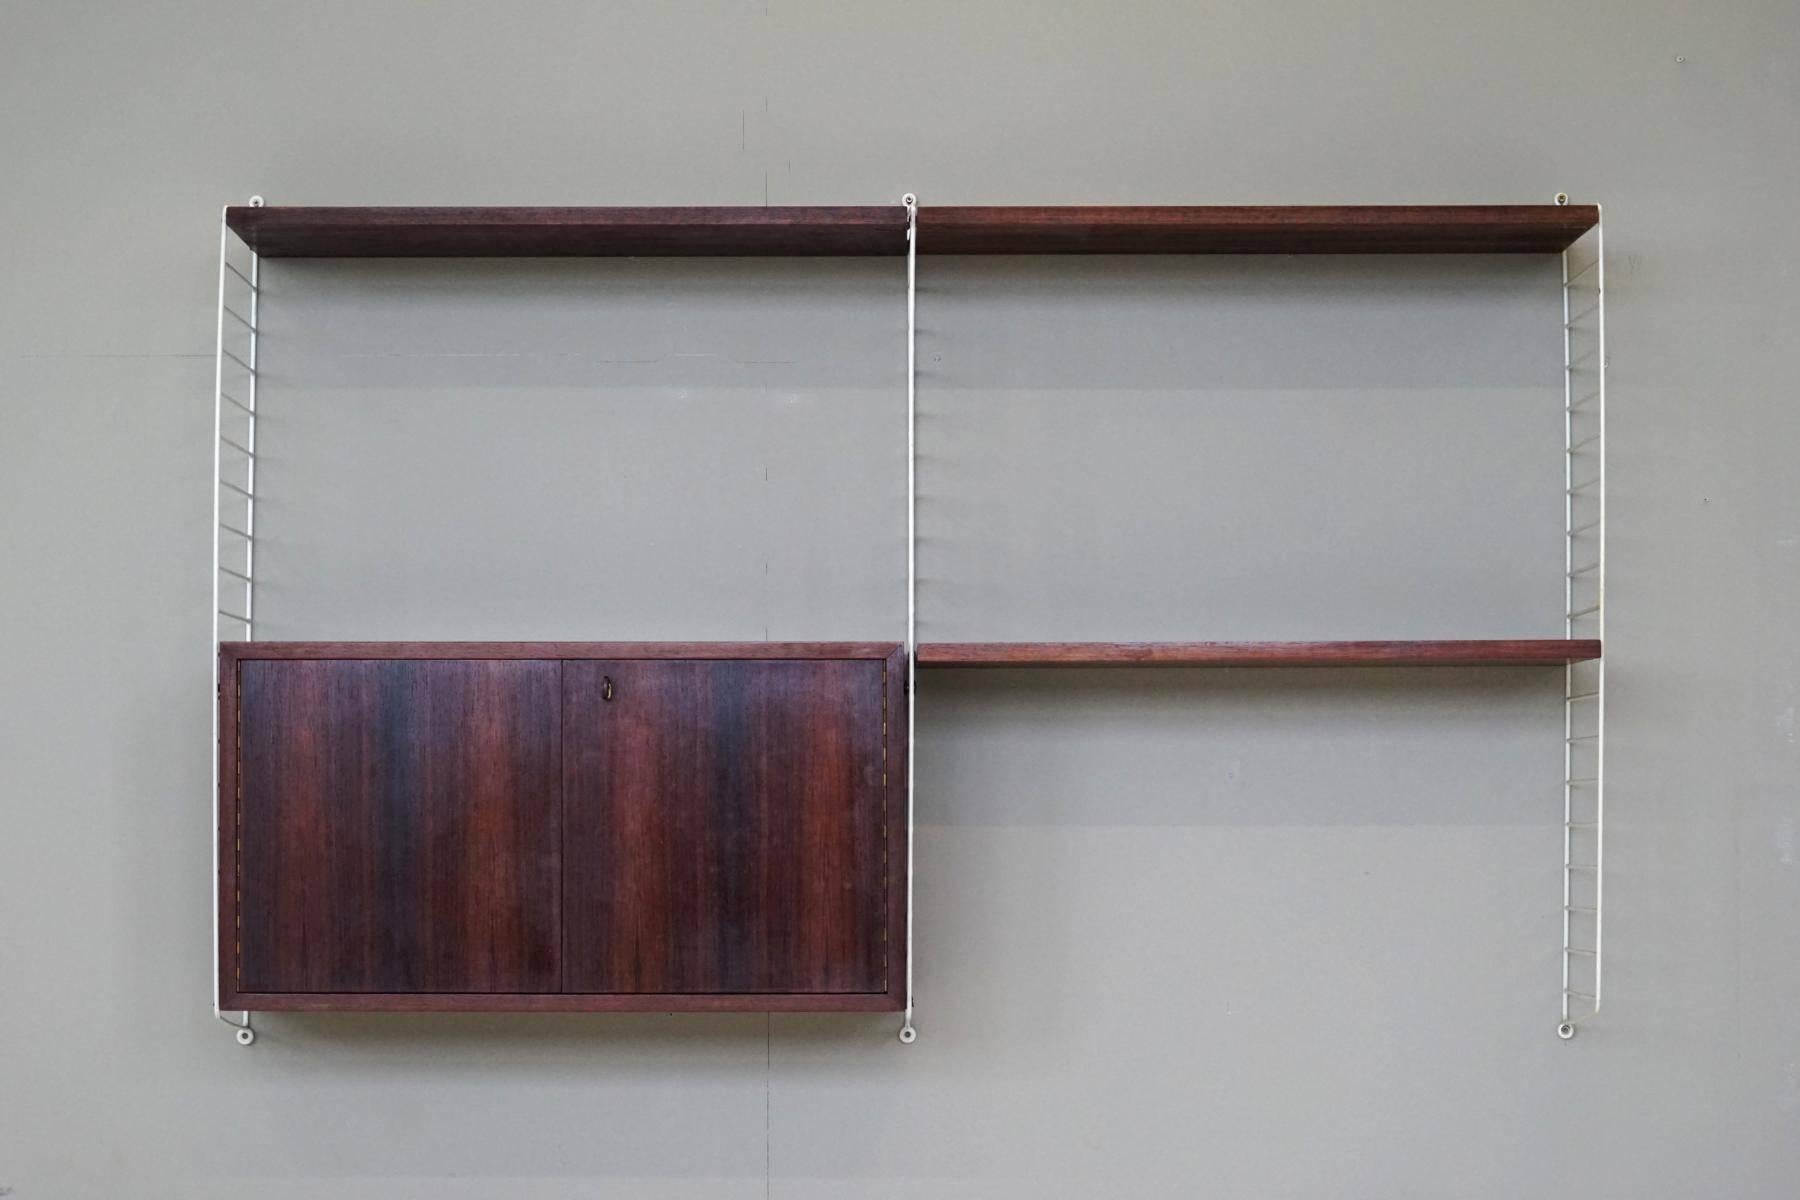 Box and Wall Unit String Shelf Rack System by Nisse Strinning, 1960s In Good Condition For Sale In Telgte, DE